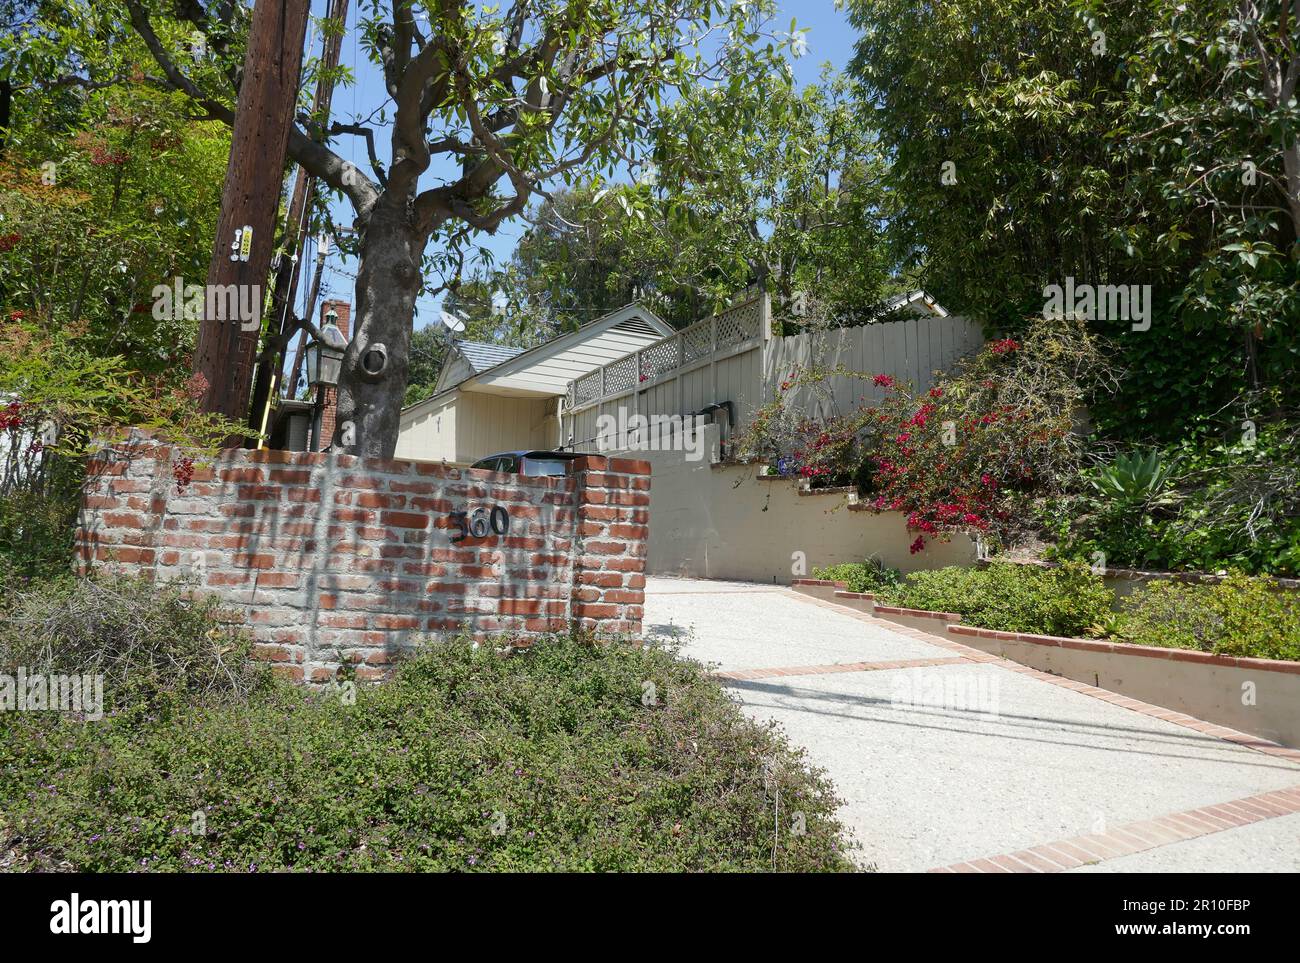 Los Angeles, California, USA 8th May 2023 Actor Montgomery Clift and Actor Dabney Coleman Former Home/house at 360 Kenter Avenue on May 8, 2023 in Los Angeles, California, USA. Photo by Barry King/Alamy Stock Photo Stock Photo